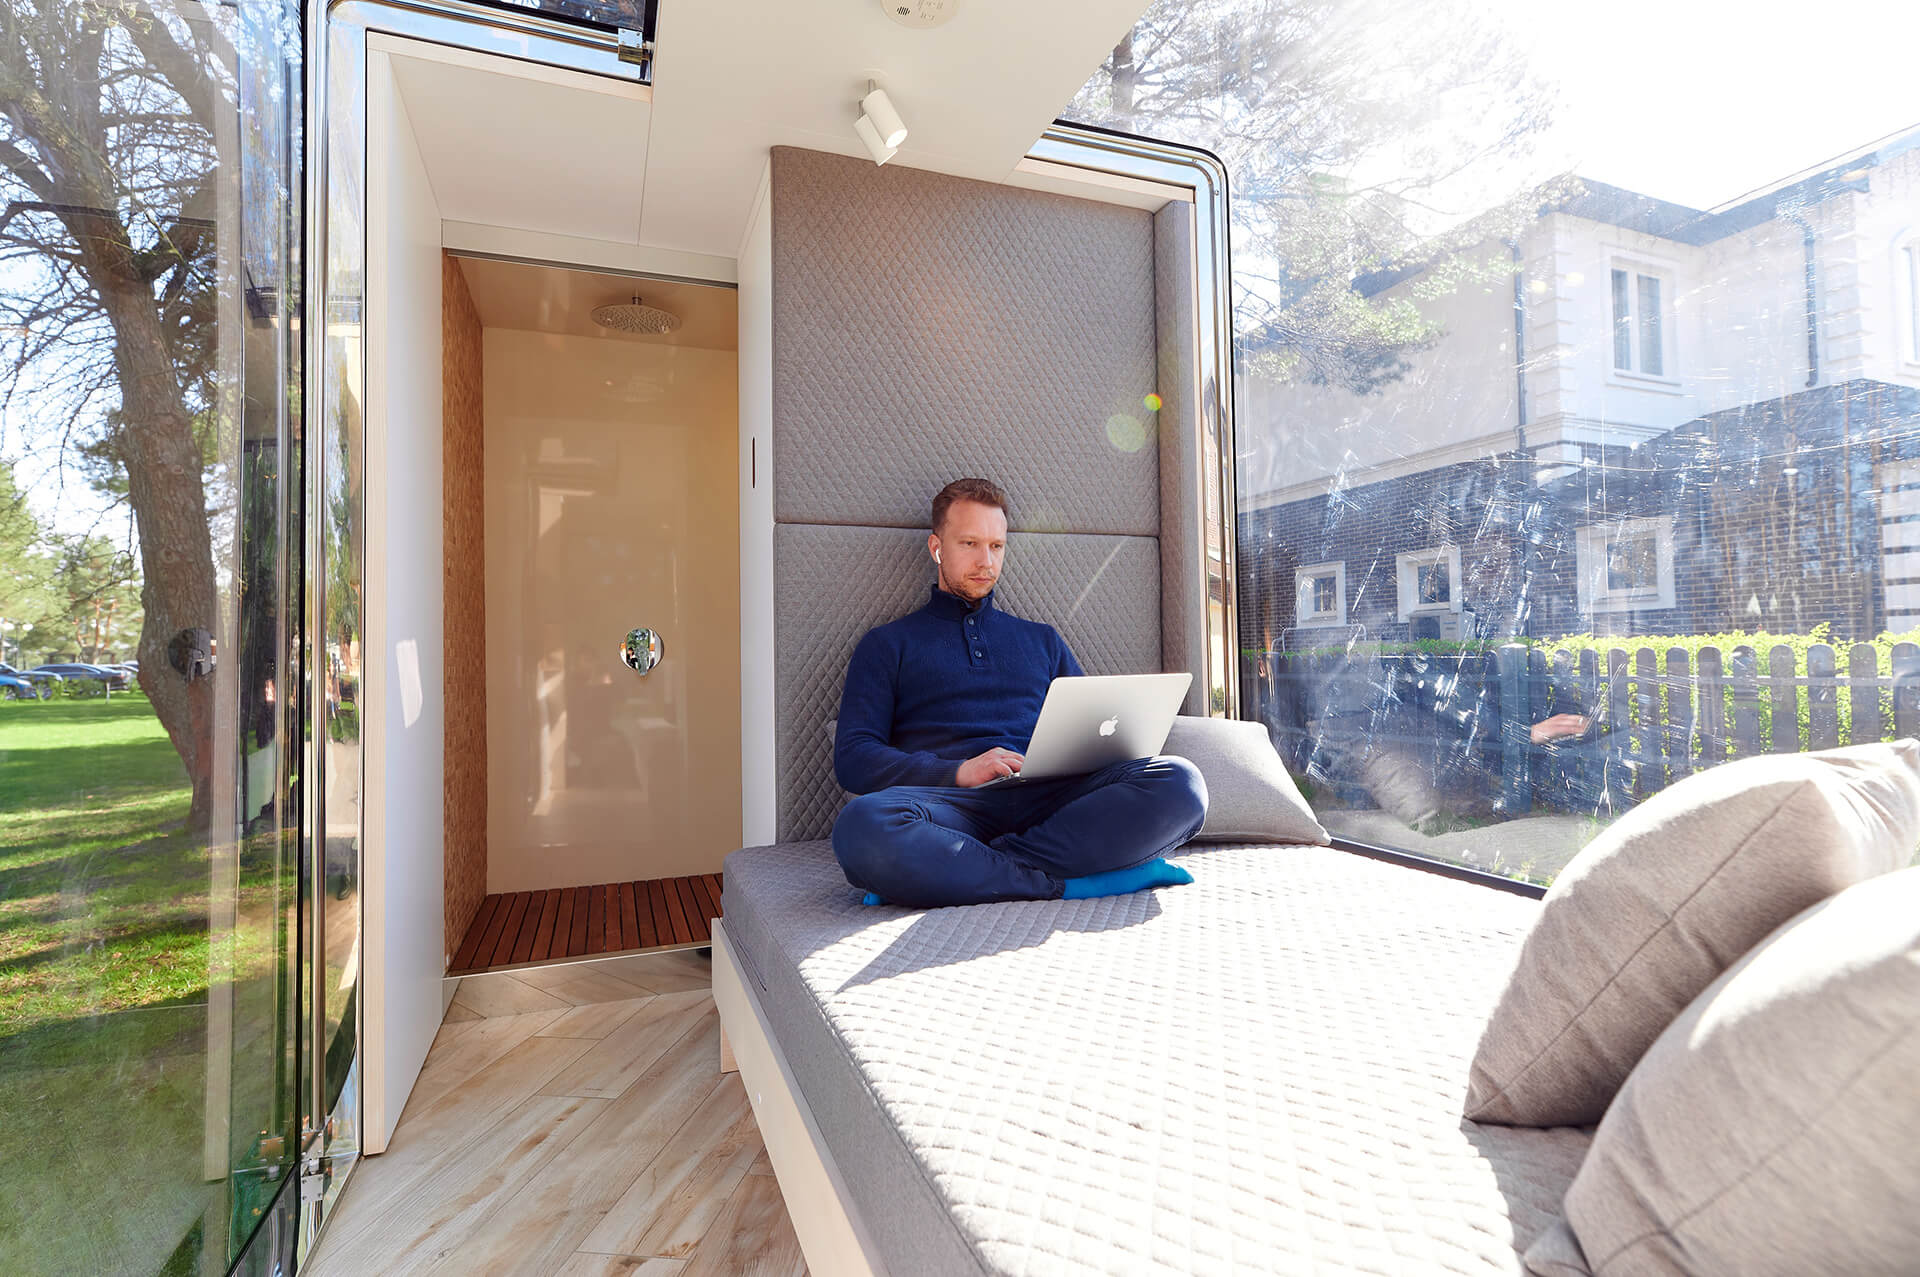 Microhaus - The most hi-tech micro home in the world. Starting